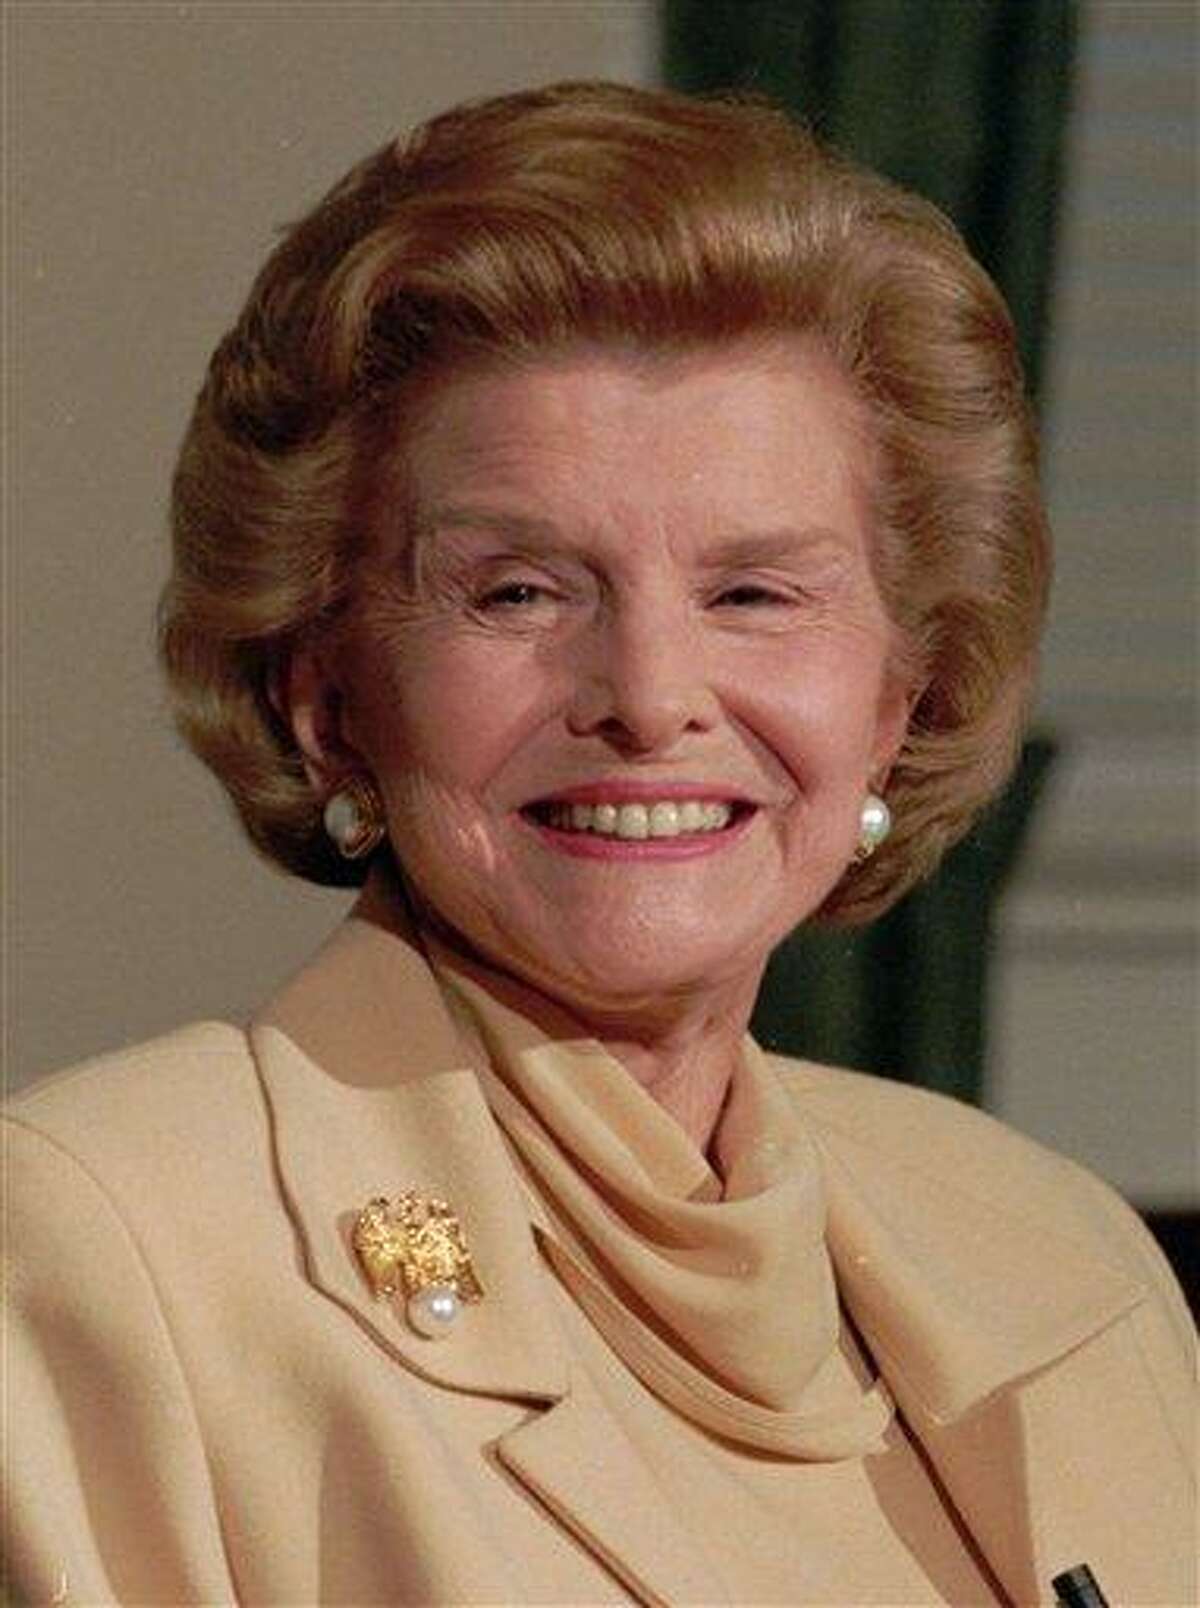 In this Aug. 30,1994 file picture, former first lady Betty Ford talks with reporters at the Old Executive Building in Washington D.C. On Friday, July 8, 2011, a family friend said that Ford had died at the age of 93.